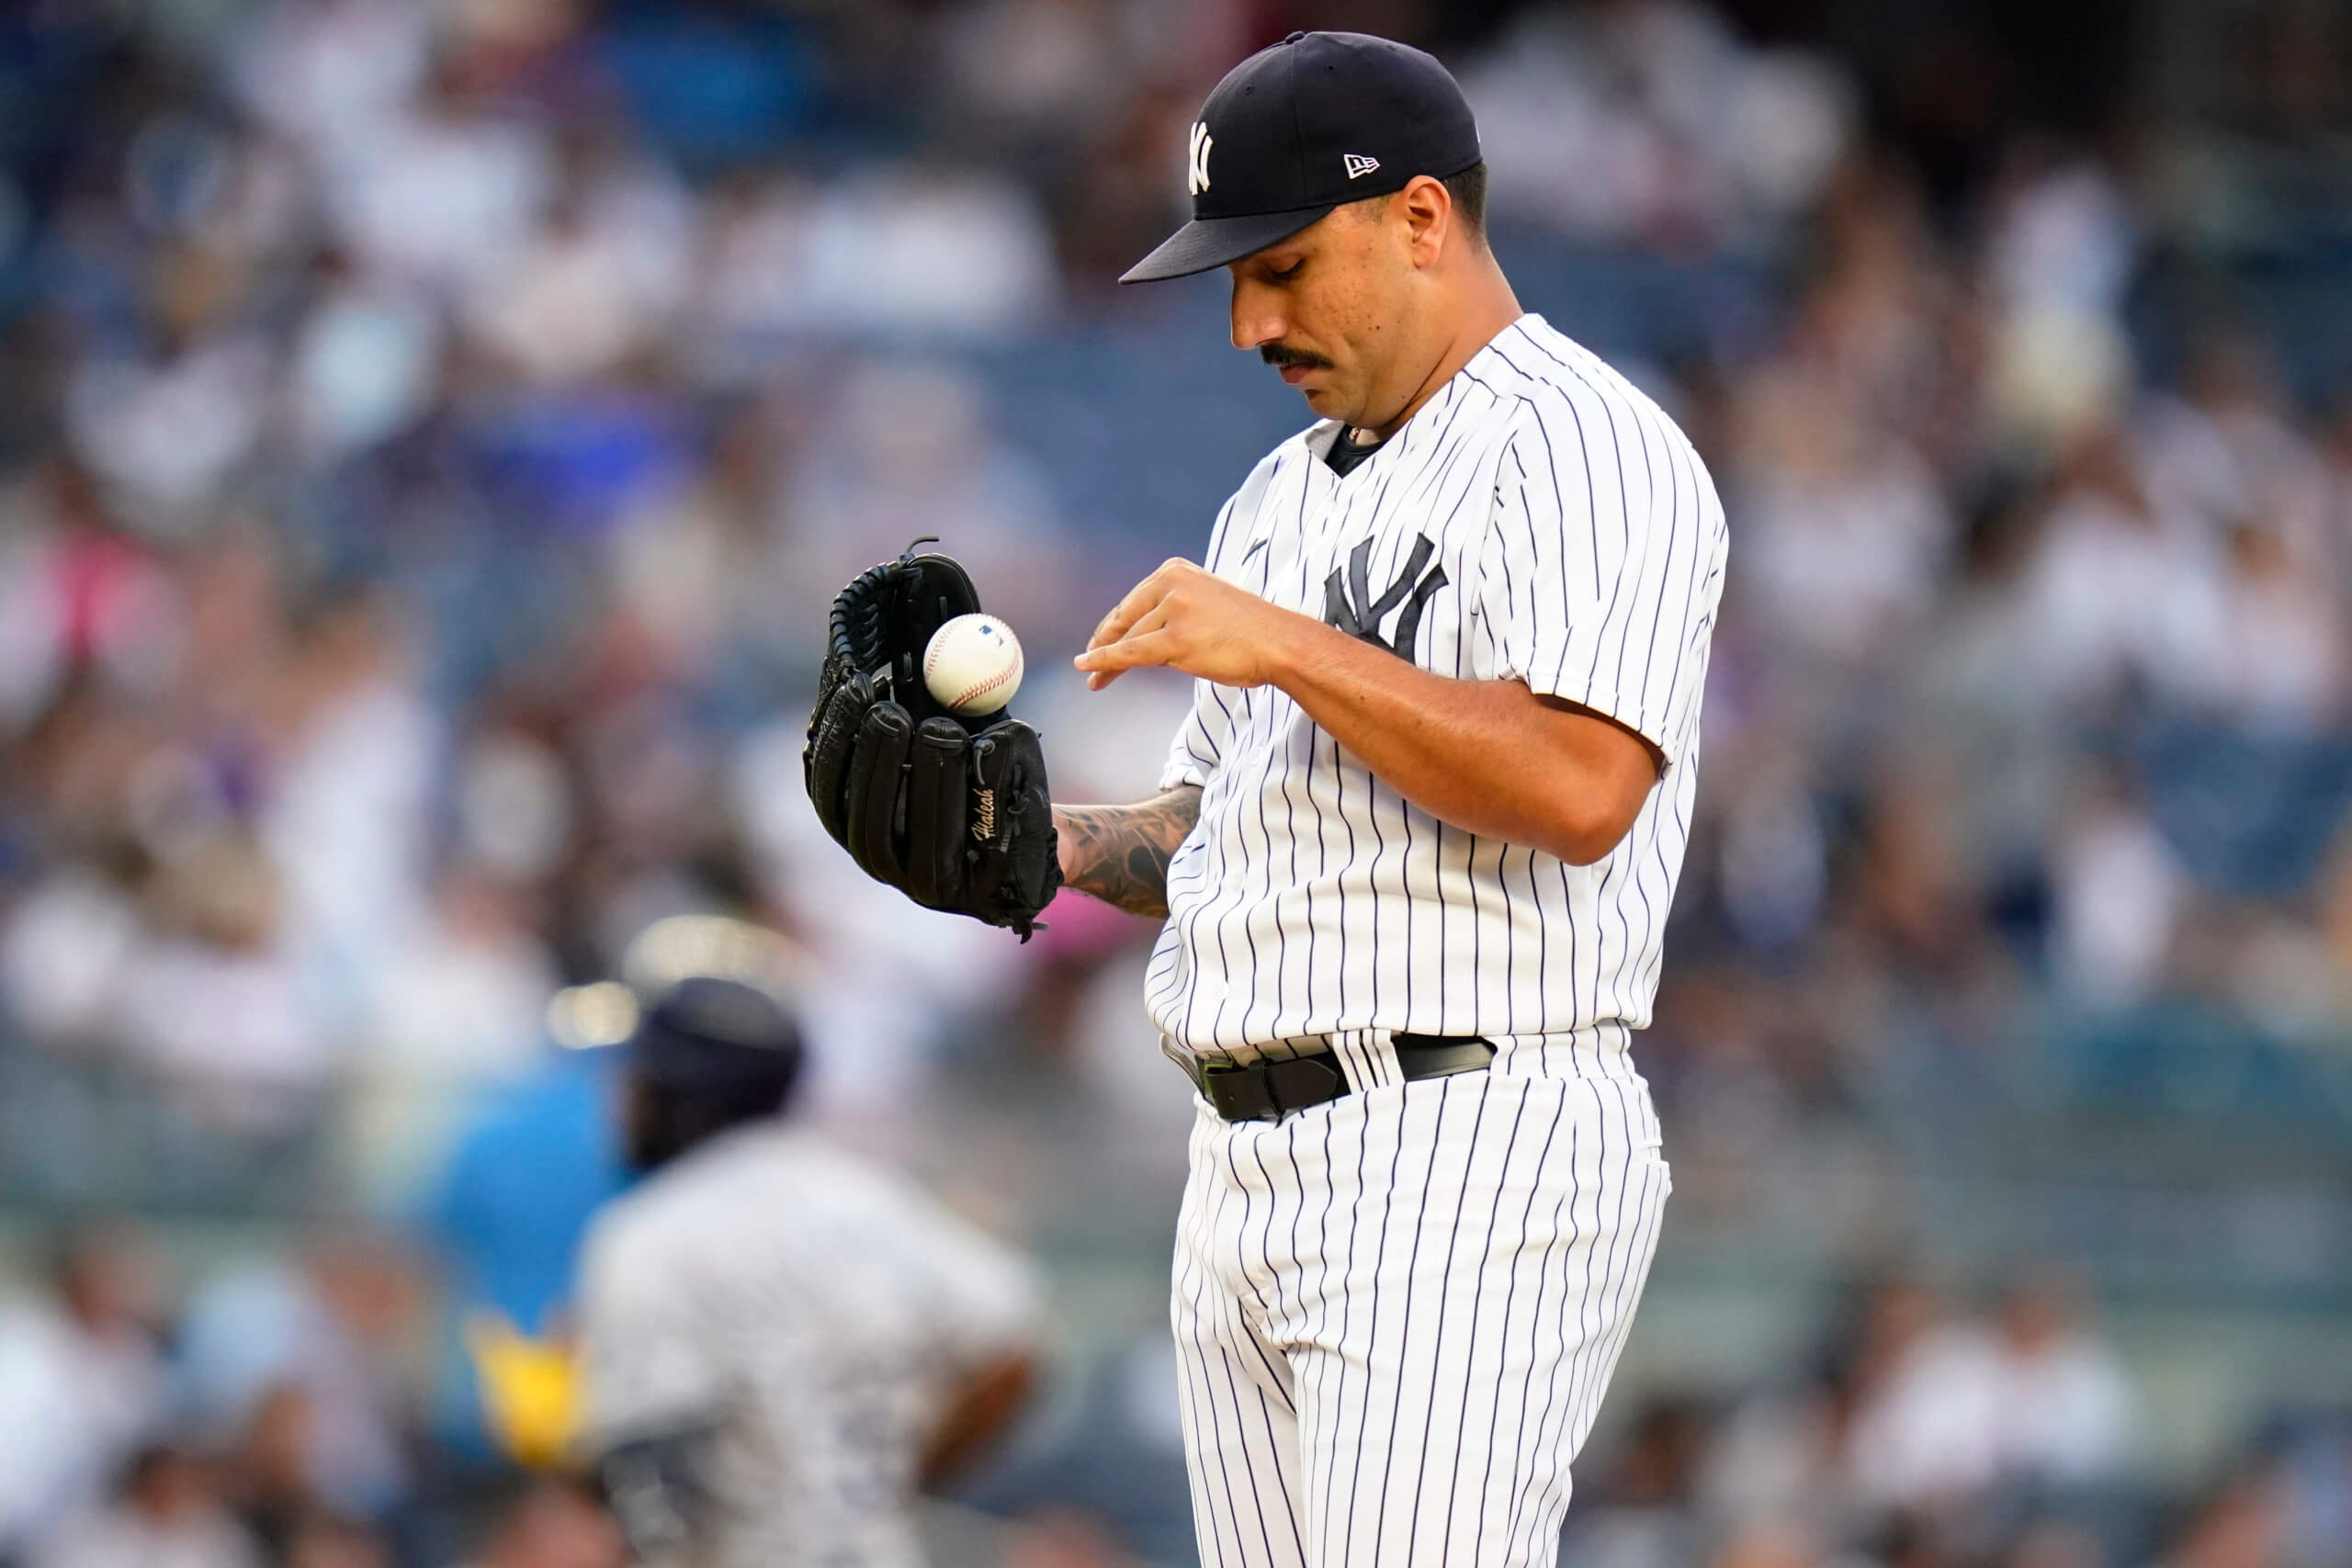 Yankees put All-Star Cortes on injured list for groin strain - NBC Sports